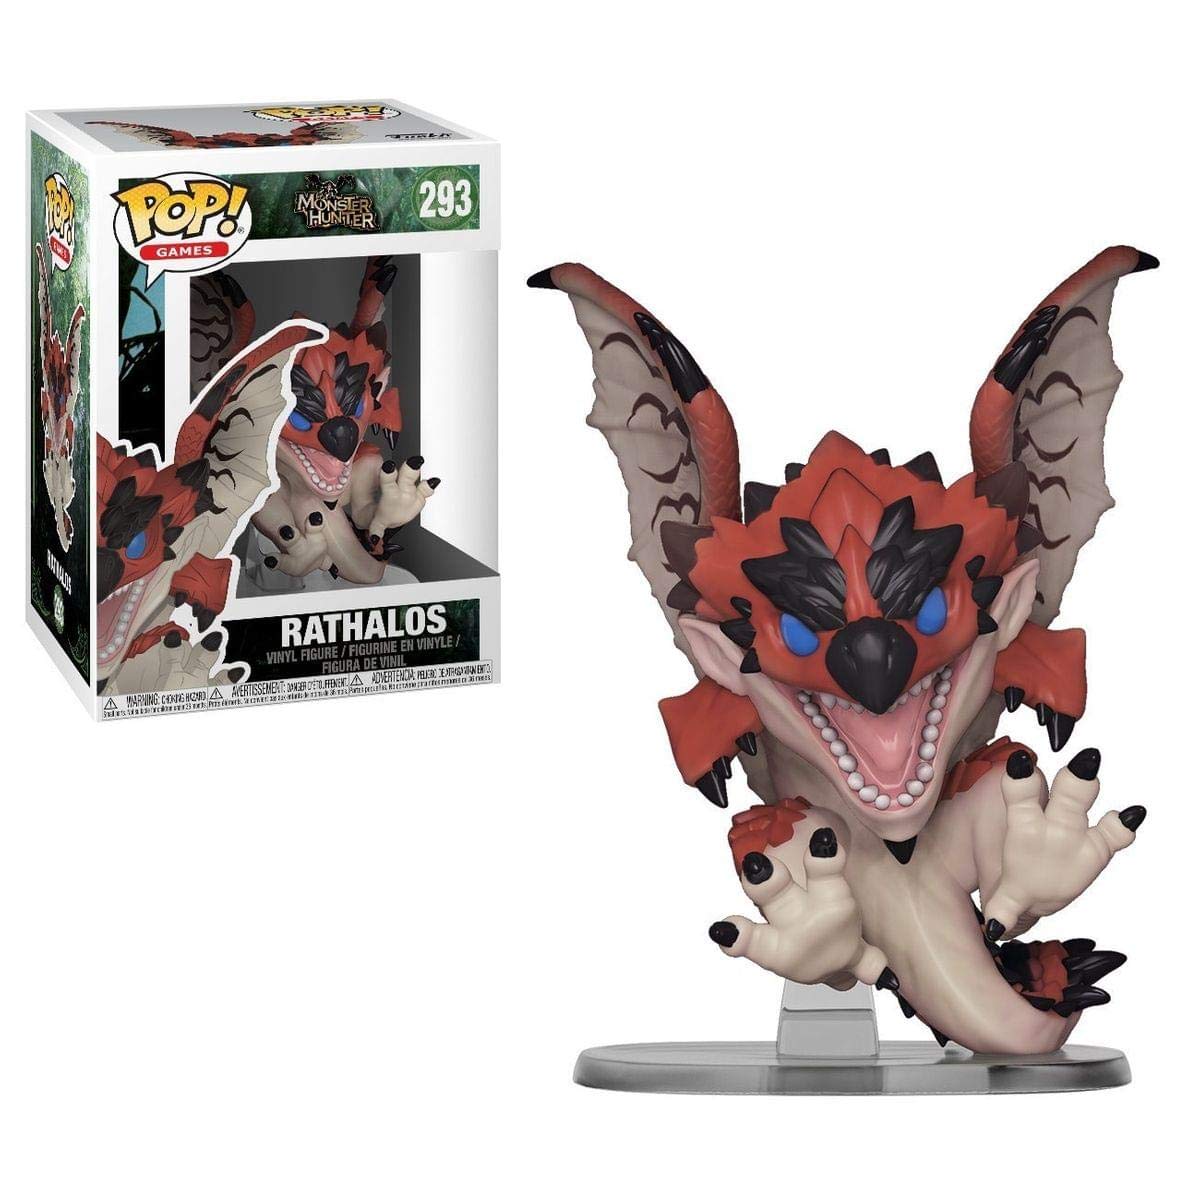 Games: Monster Hunter - Rathalos Collectible Figure